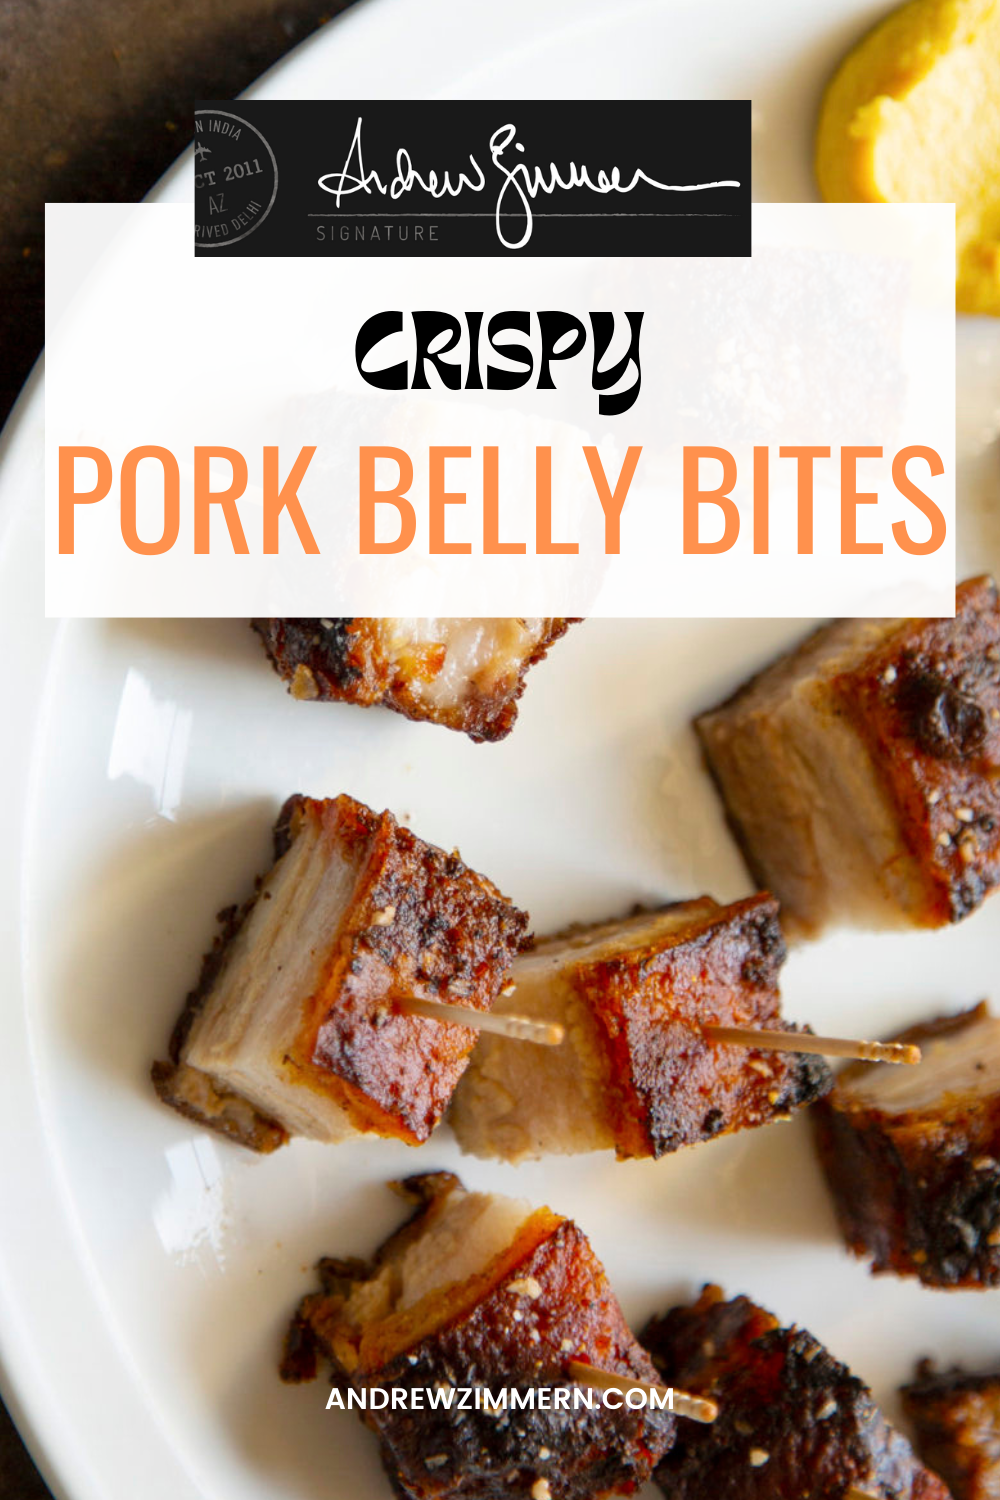 If you're looking for the perfect salty, crispy appetizer (or midnight snack), do yourself a favor and try this pork belly recipe. Just remember to keep an eye on your broiler—I remembered to do that a little later than I should have, but I have to admit, it was a pretty delicious fail.